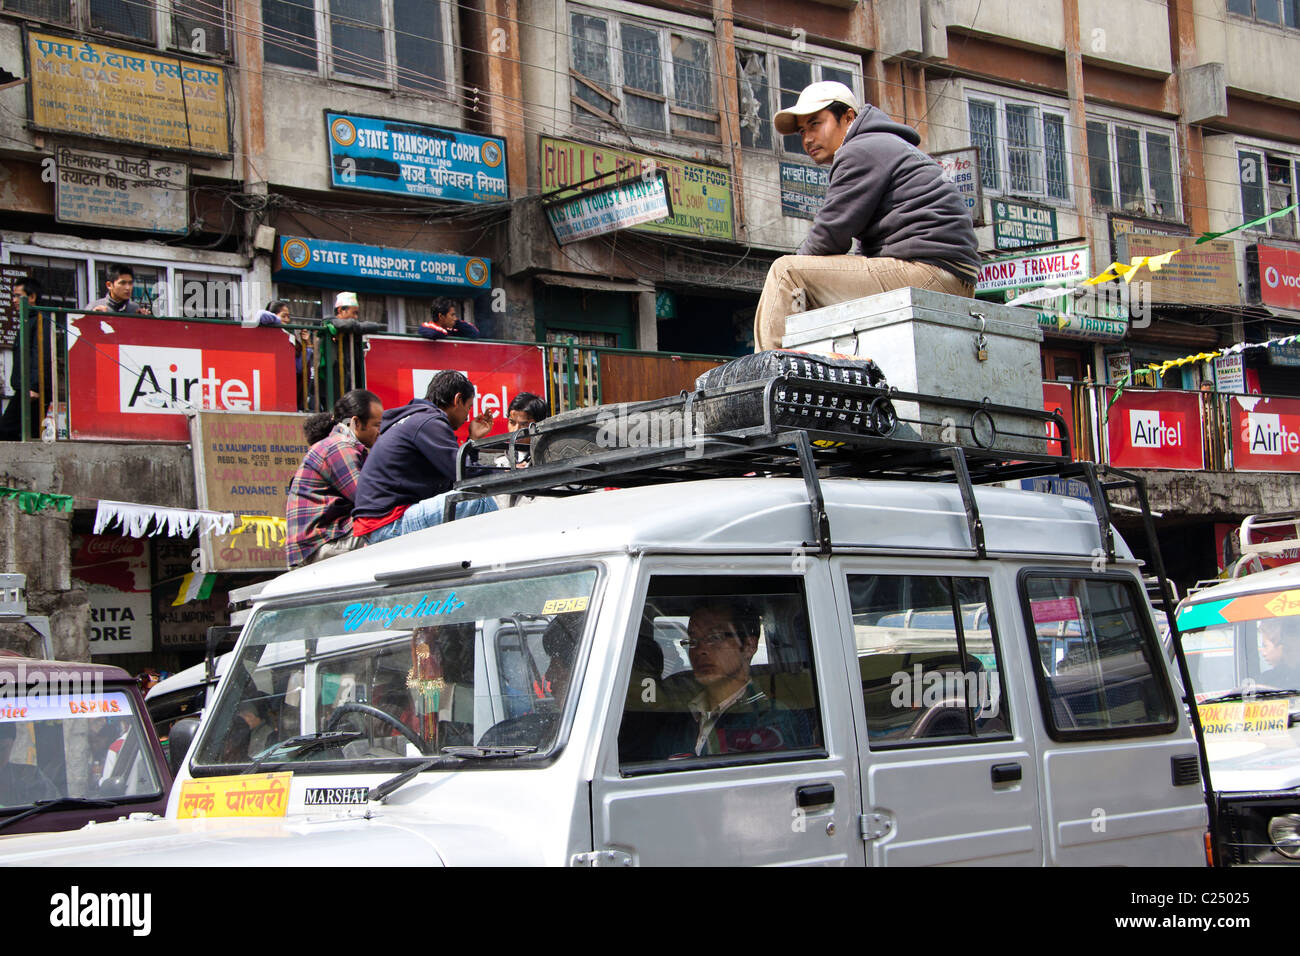 Shared taxis await passengers to nearby towns at Chowk Bazar taxi stand in Darjeeling, West Bengal, India. Stock Photo